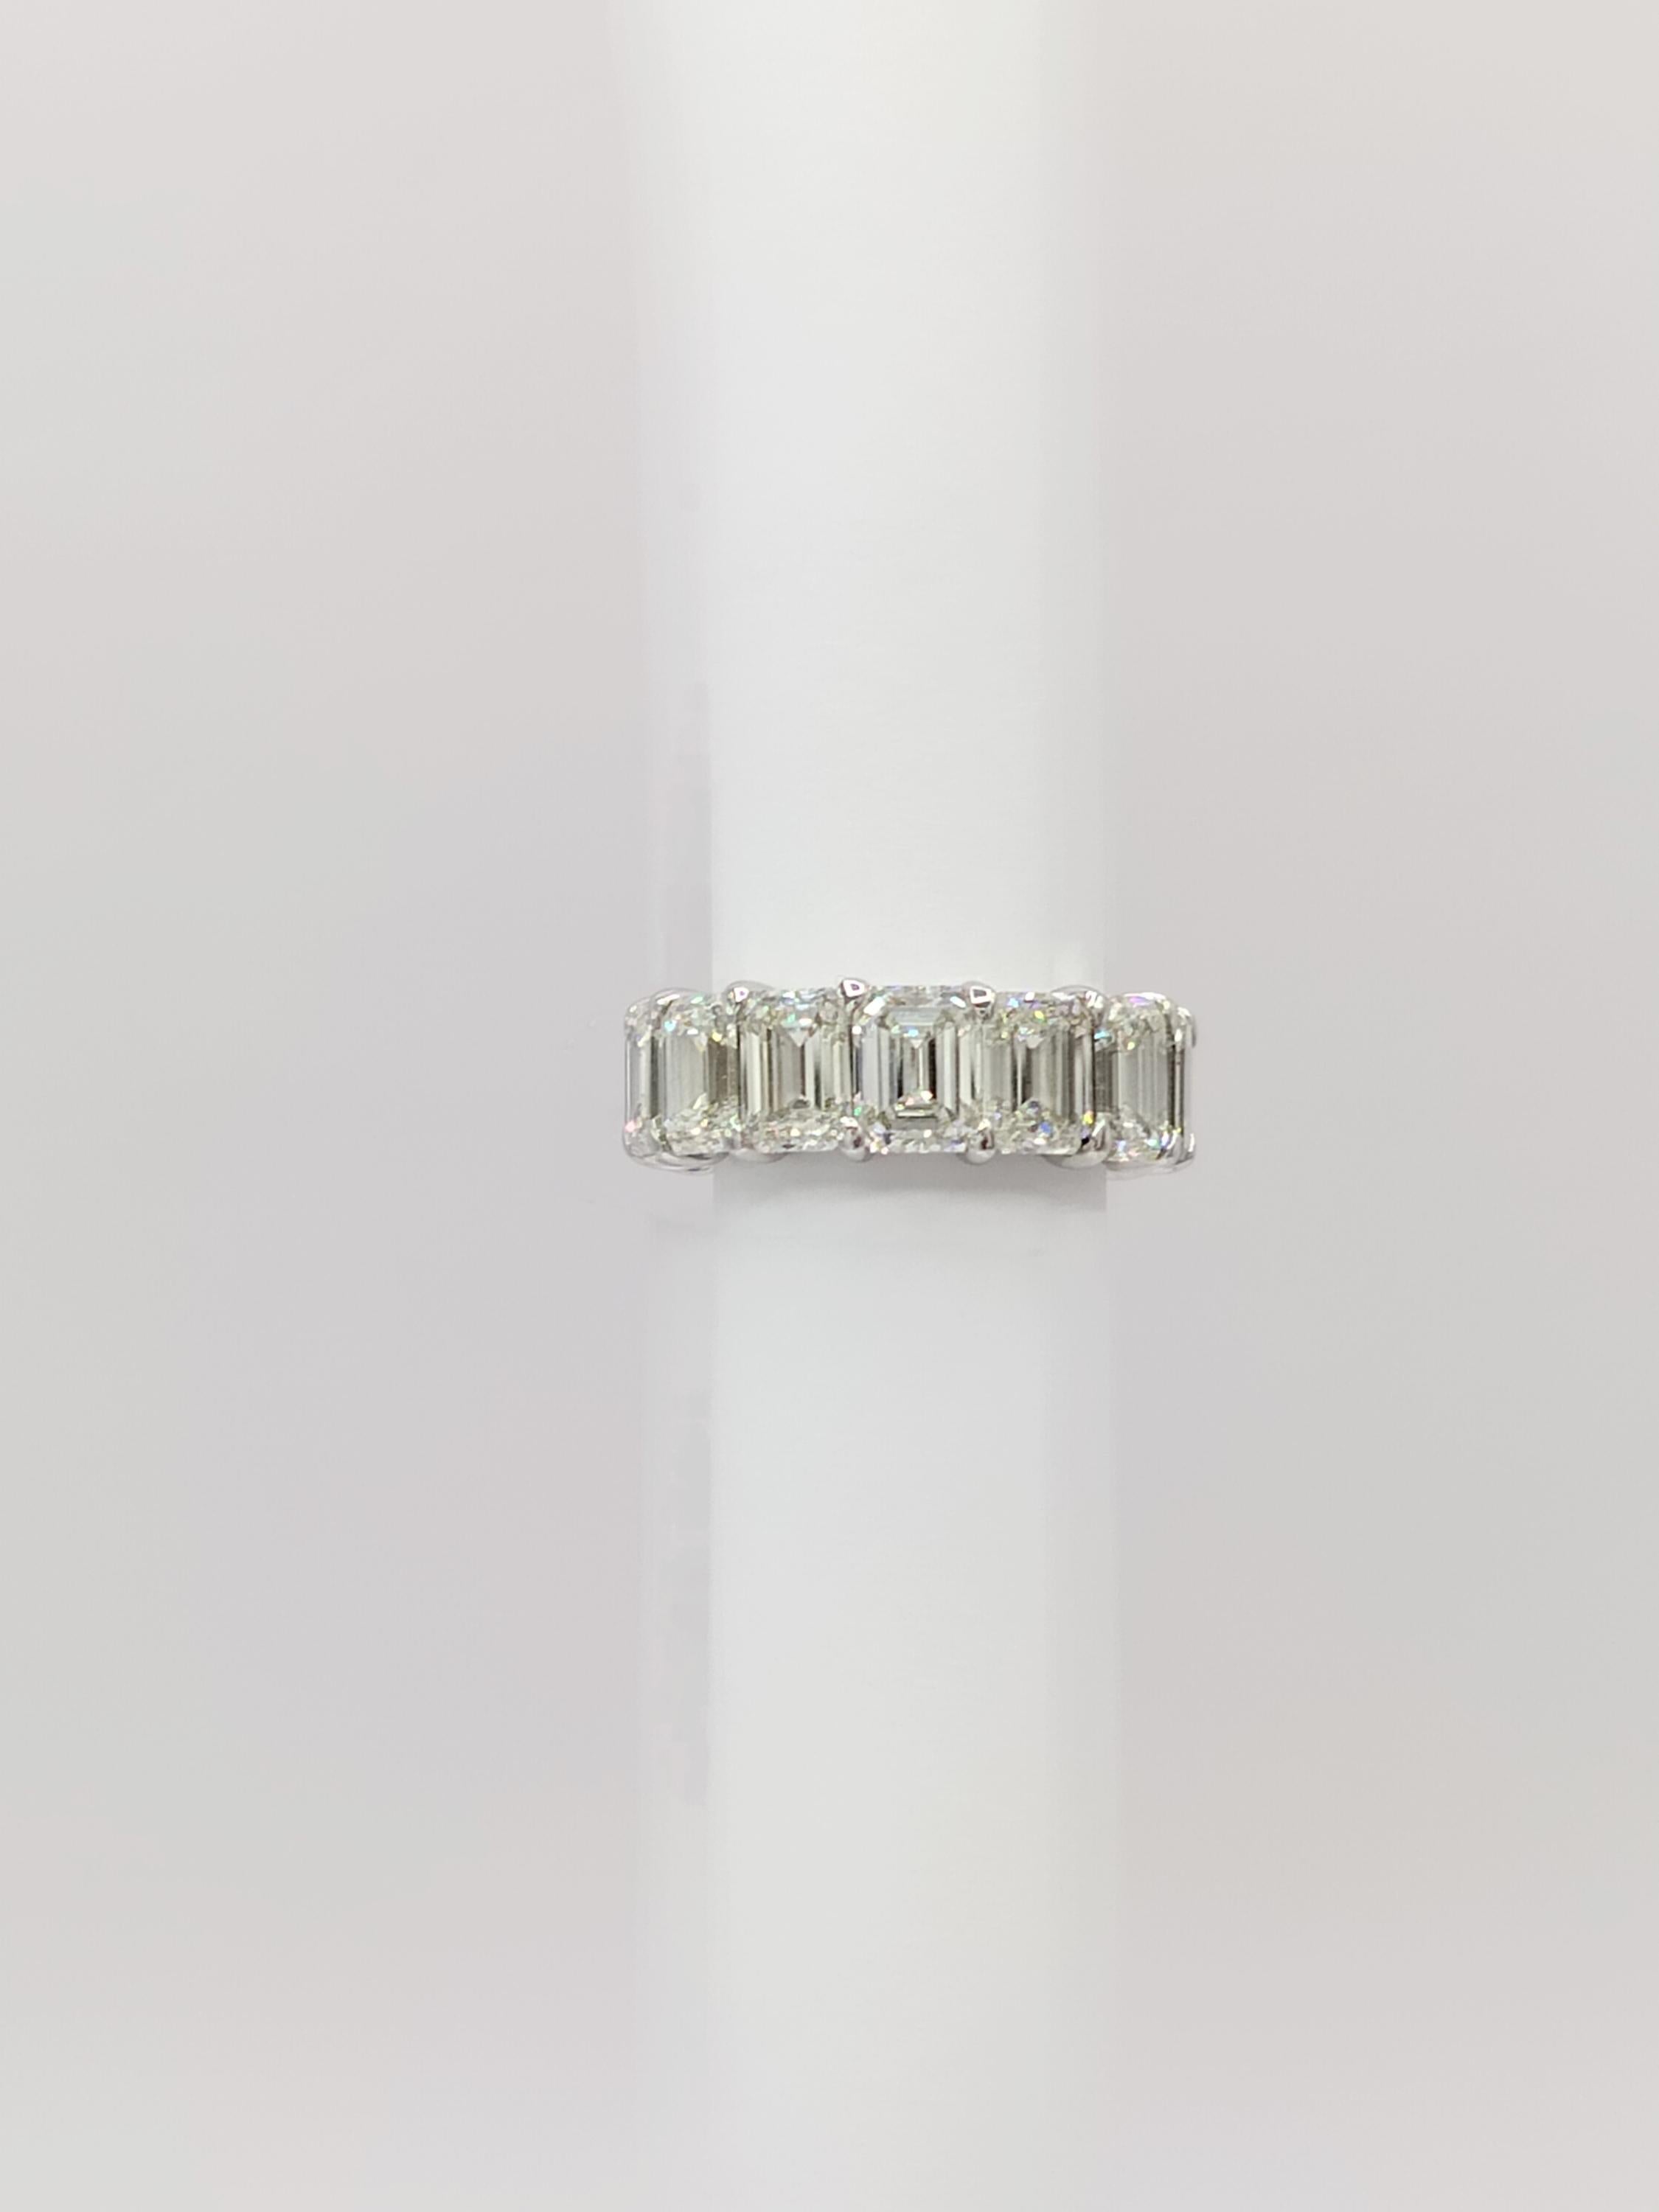 Women's or Men's GIA Emerald Cut 1 Carat Each Diamond Eternity Band Ring in 18K White Gold For Sale